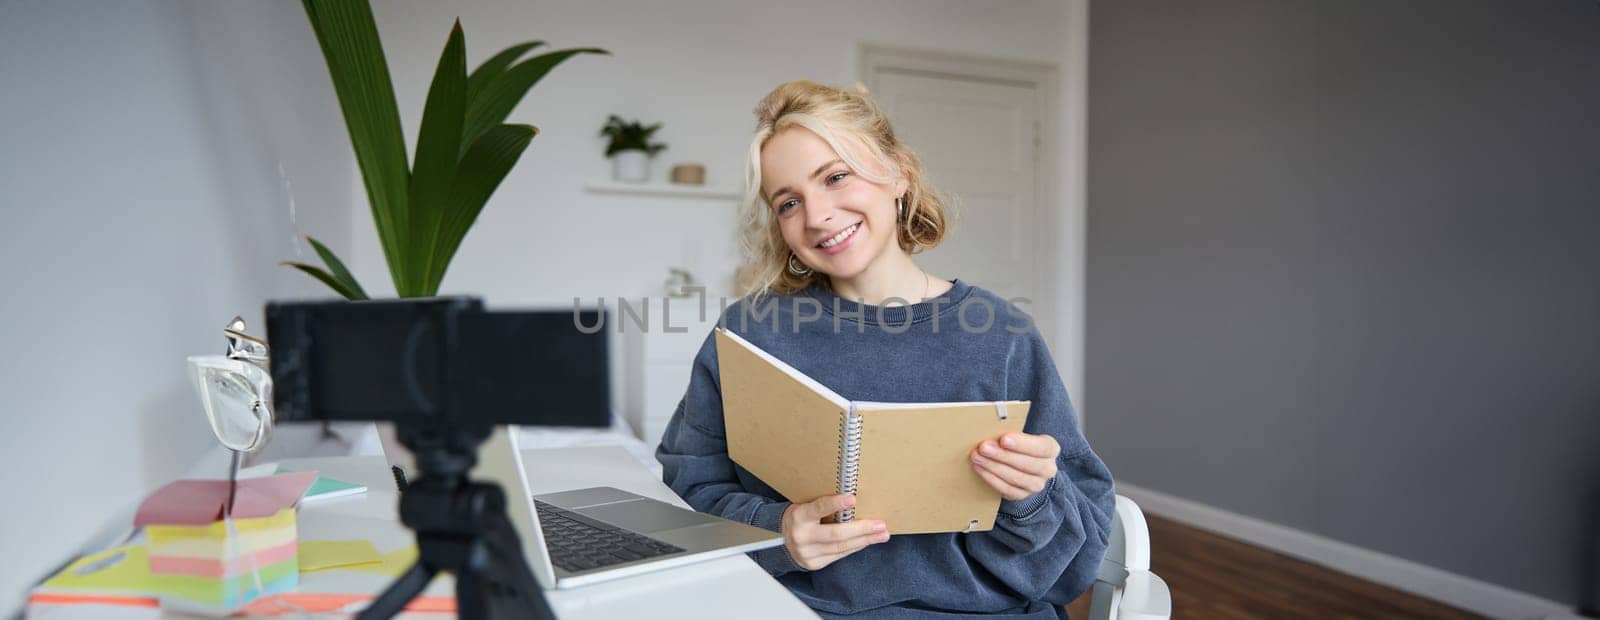 Portrait of cute young woman, teenage girl records video on digital camera, uses laptop to create lifestyle content, shows notebook, reads notes, using computer in her room.